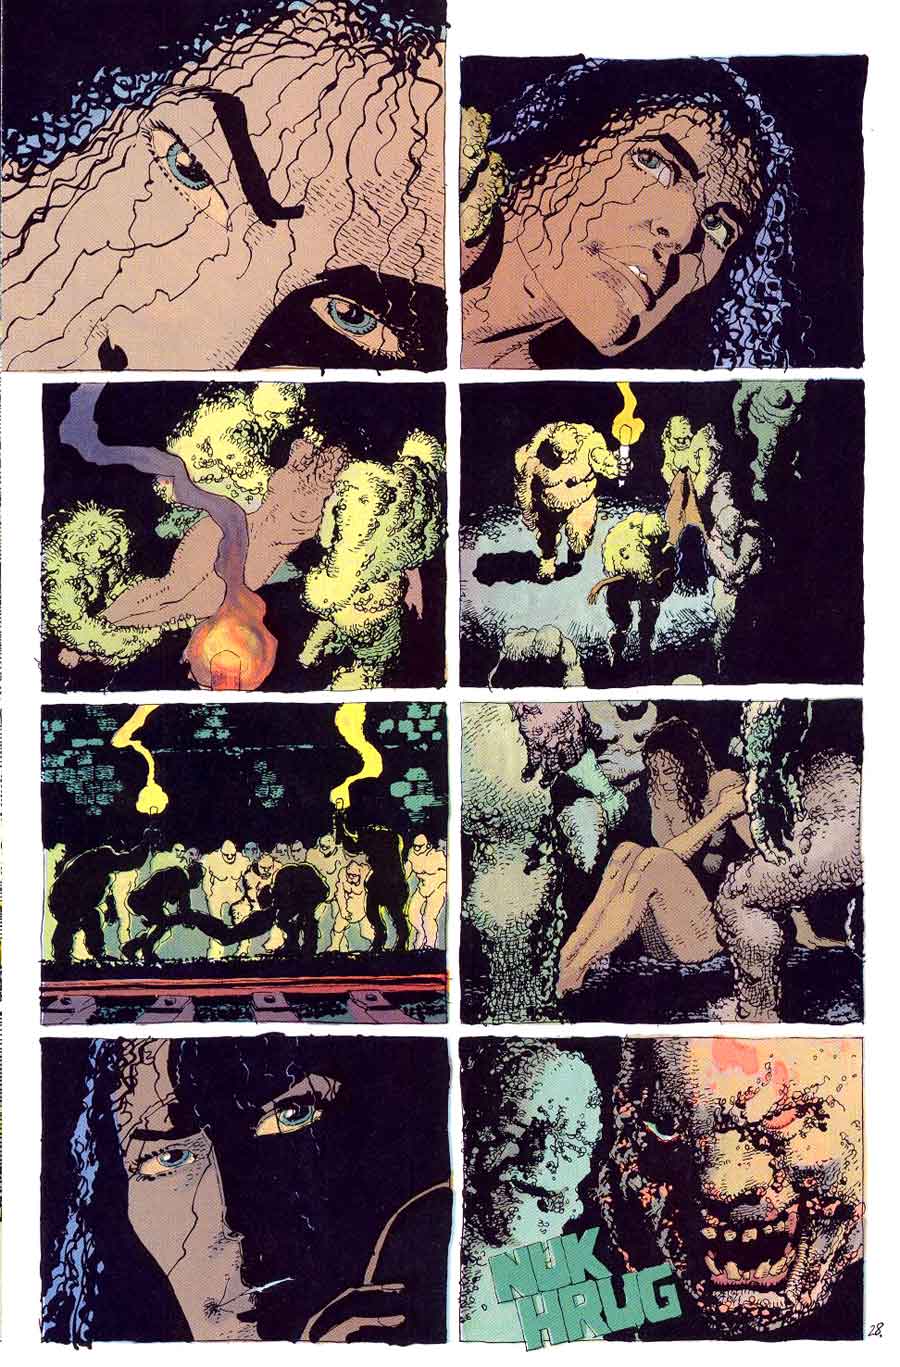 Ronin v1 #4 dc comic book page art by Frank Miller